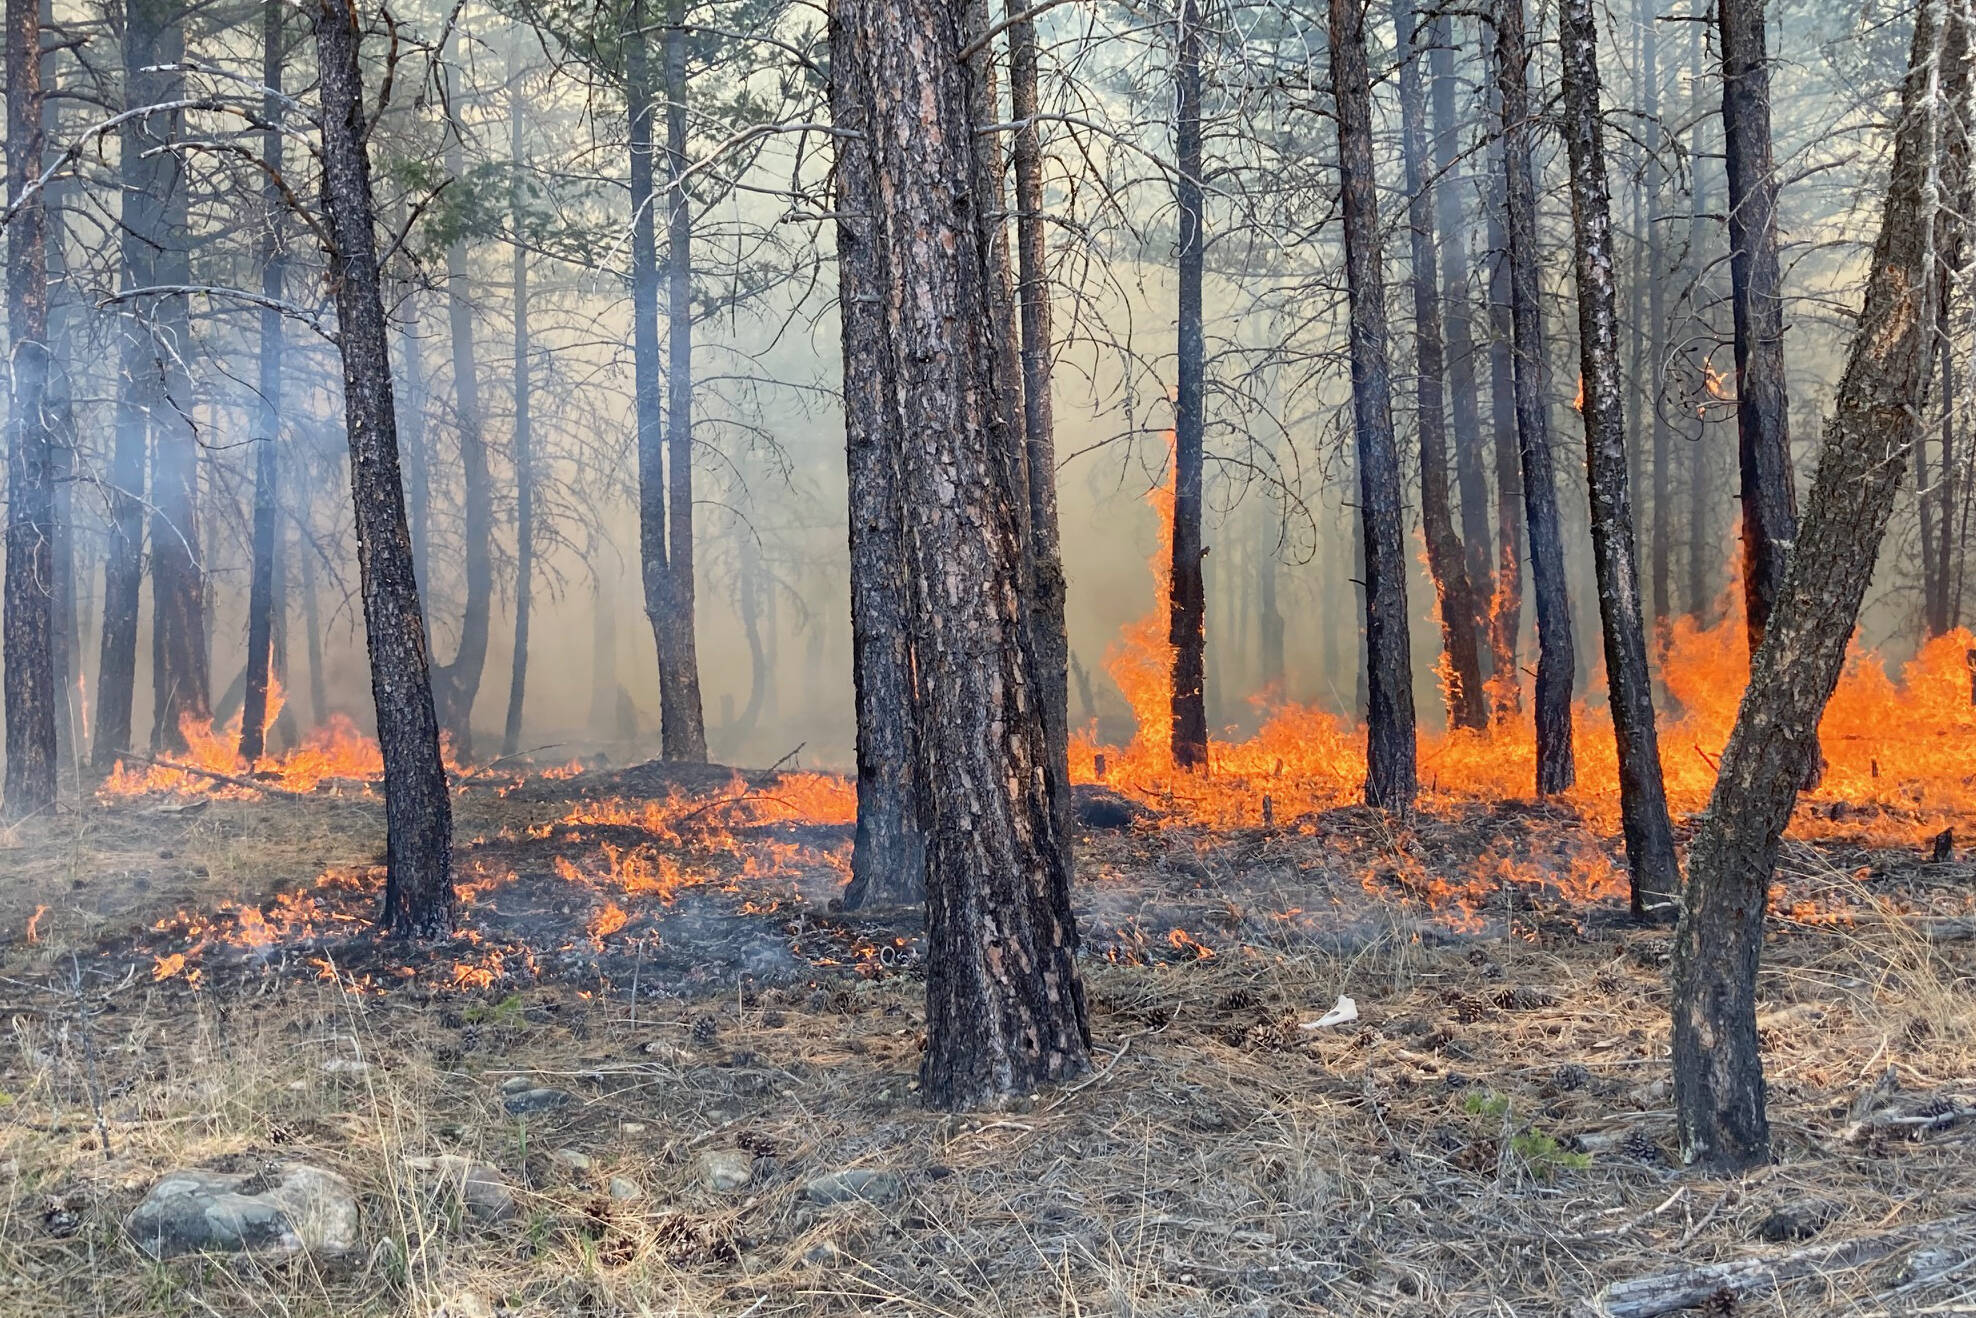 The ʔaq̓am Community and partner agencies completed a 1,200 prescribed burn at the end of April, utilizing traditional Ktunaxa knowledge for land management. Photo courtesy Colleen Ross.